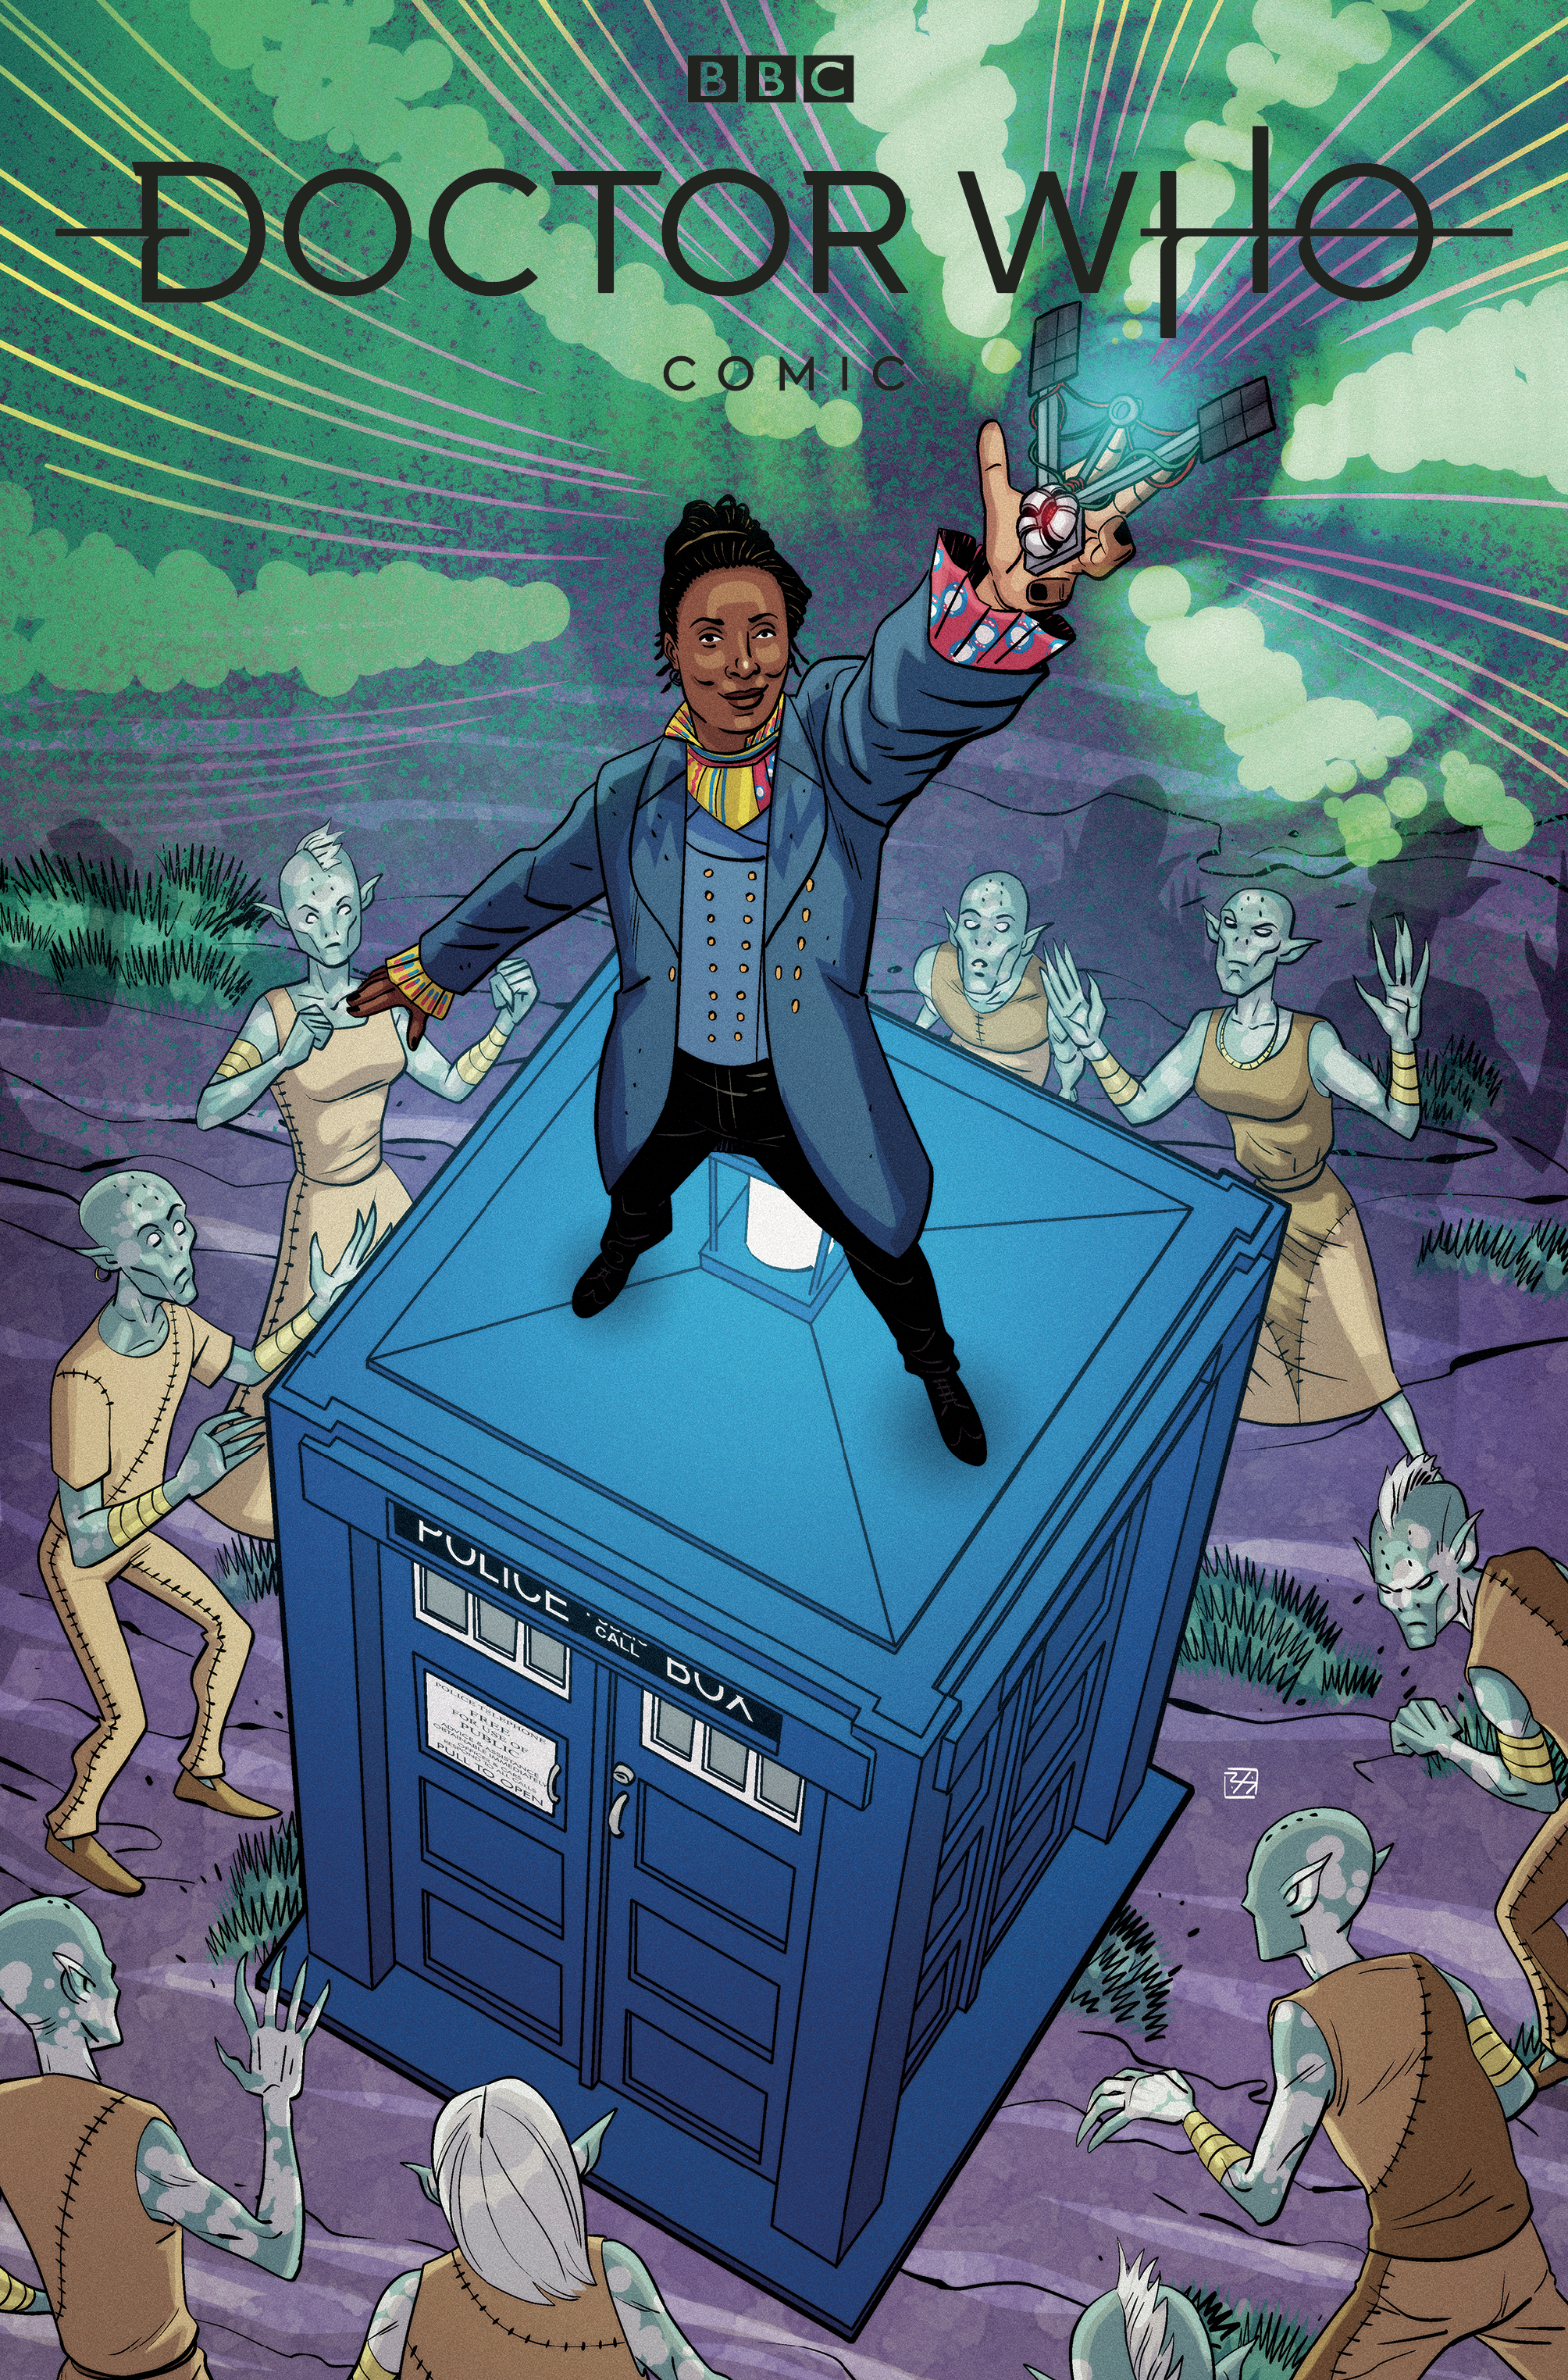 Doctor Who Origins #4 Cover C Shedd (Of 4)